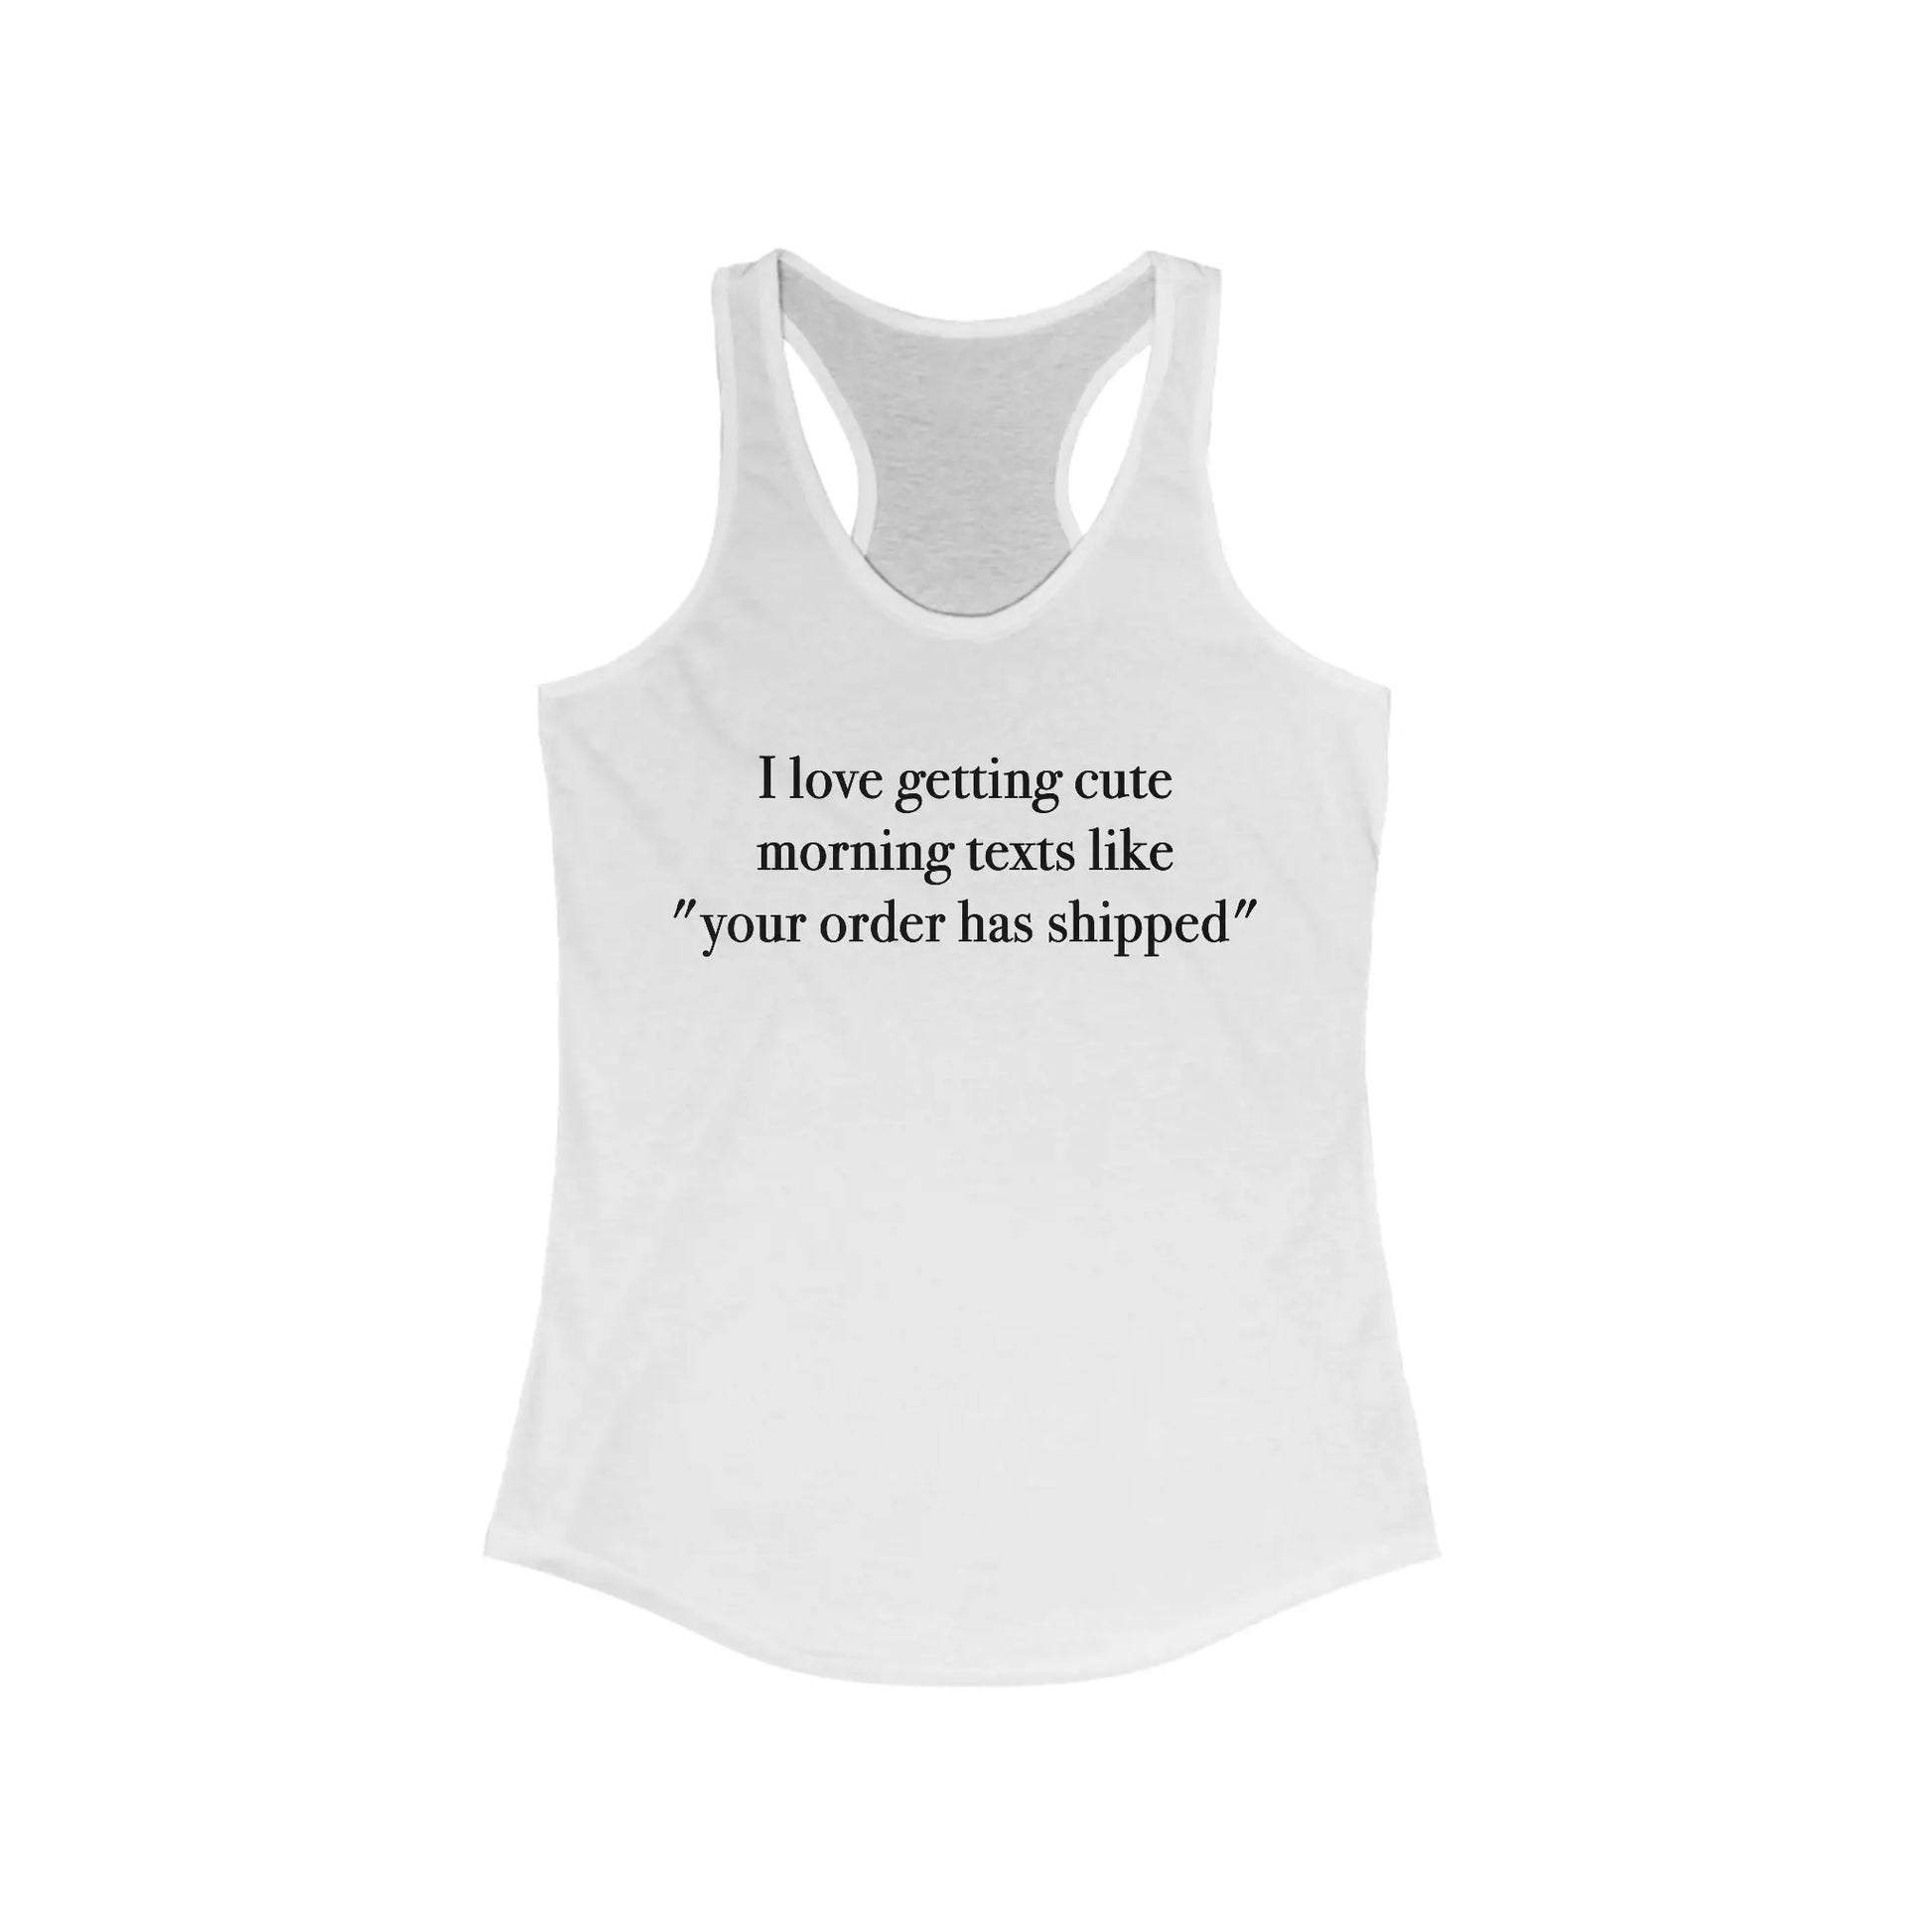 Cute Morning Texts Women's Ideal Racerback Tank - Wicked Tees